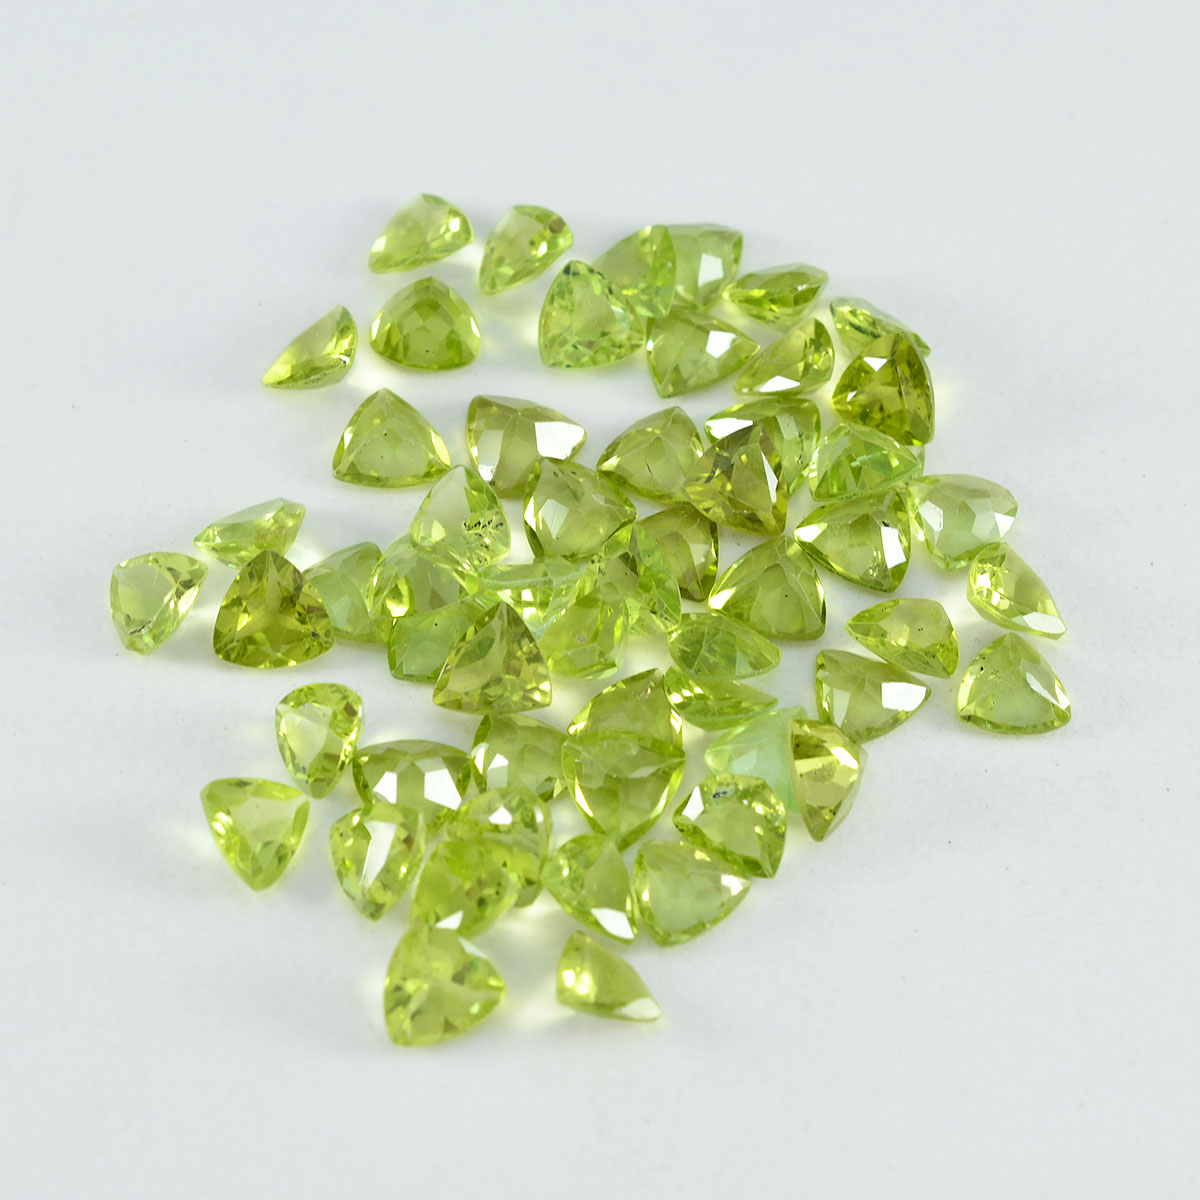 Riyogems 1PC Real Green Peridot Faceted 5x5 mm Trillion Shape awesome Quality Gemstone